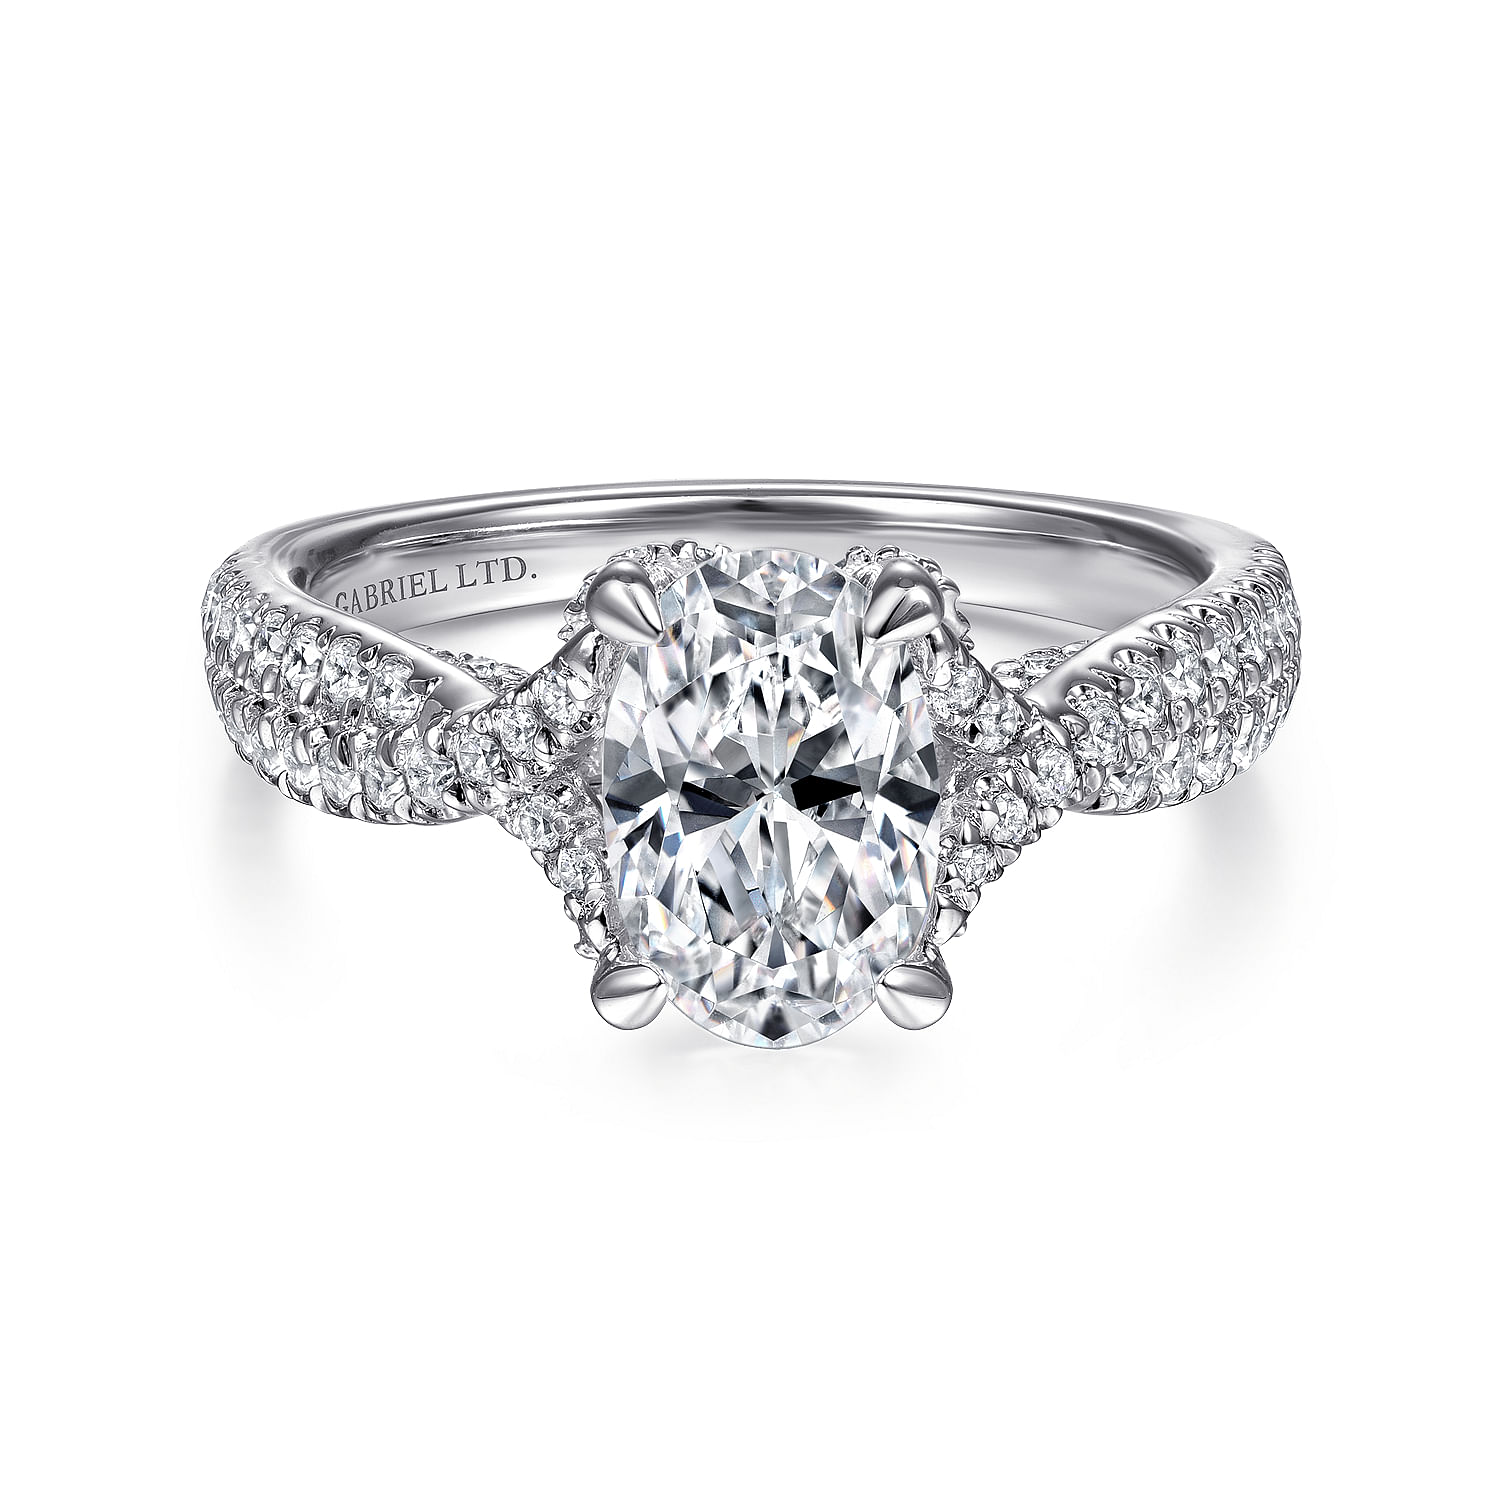 18K White Gold Twisted Oval Diamond Engagement Ring